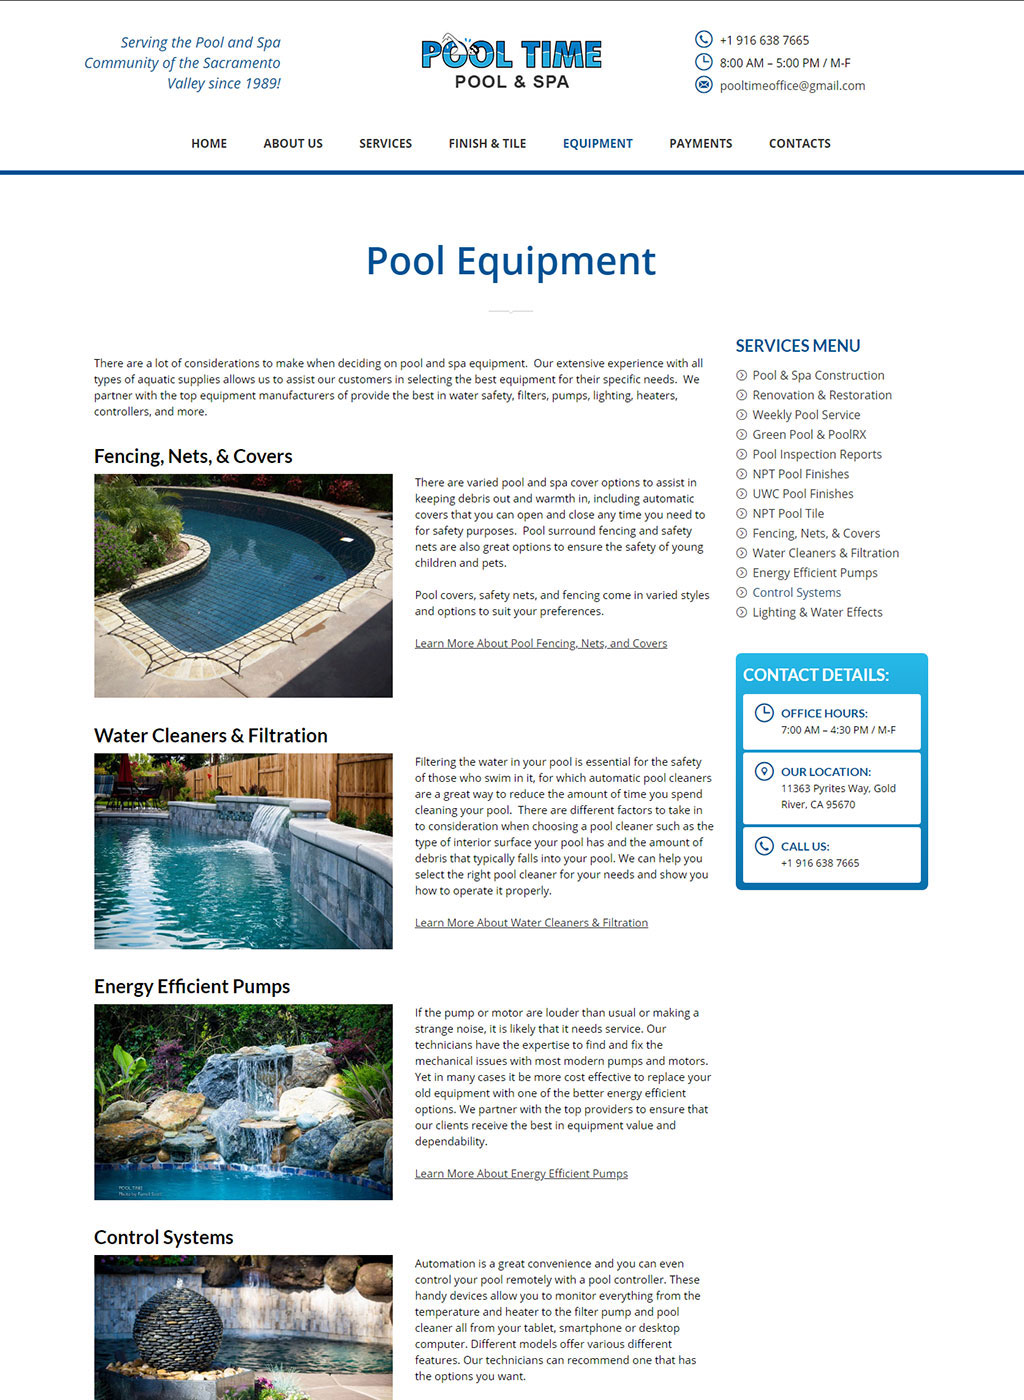 Pool equipment page developed for Sacramento pool and spa contractors